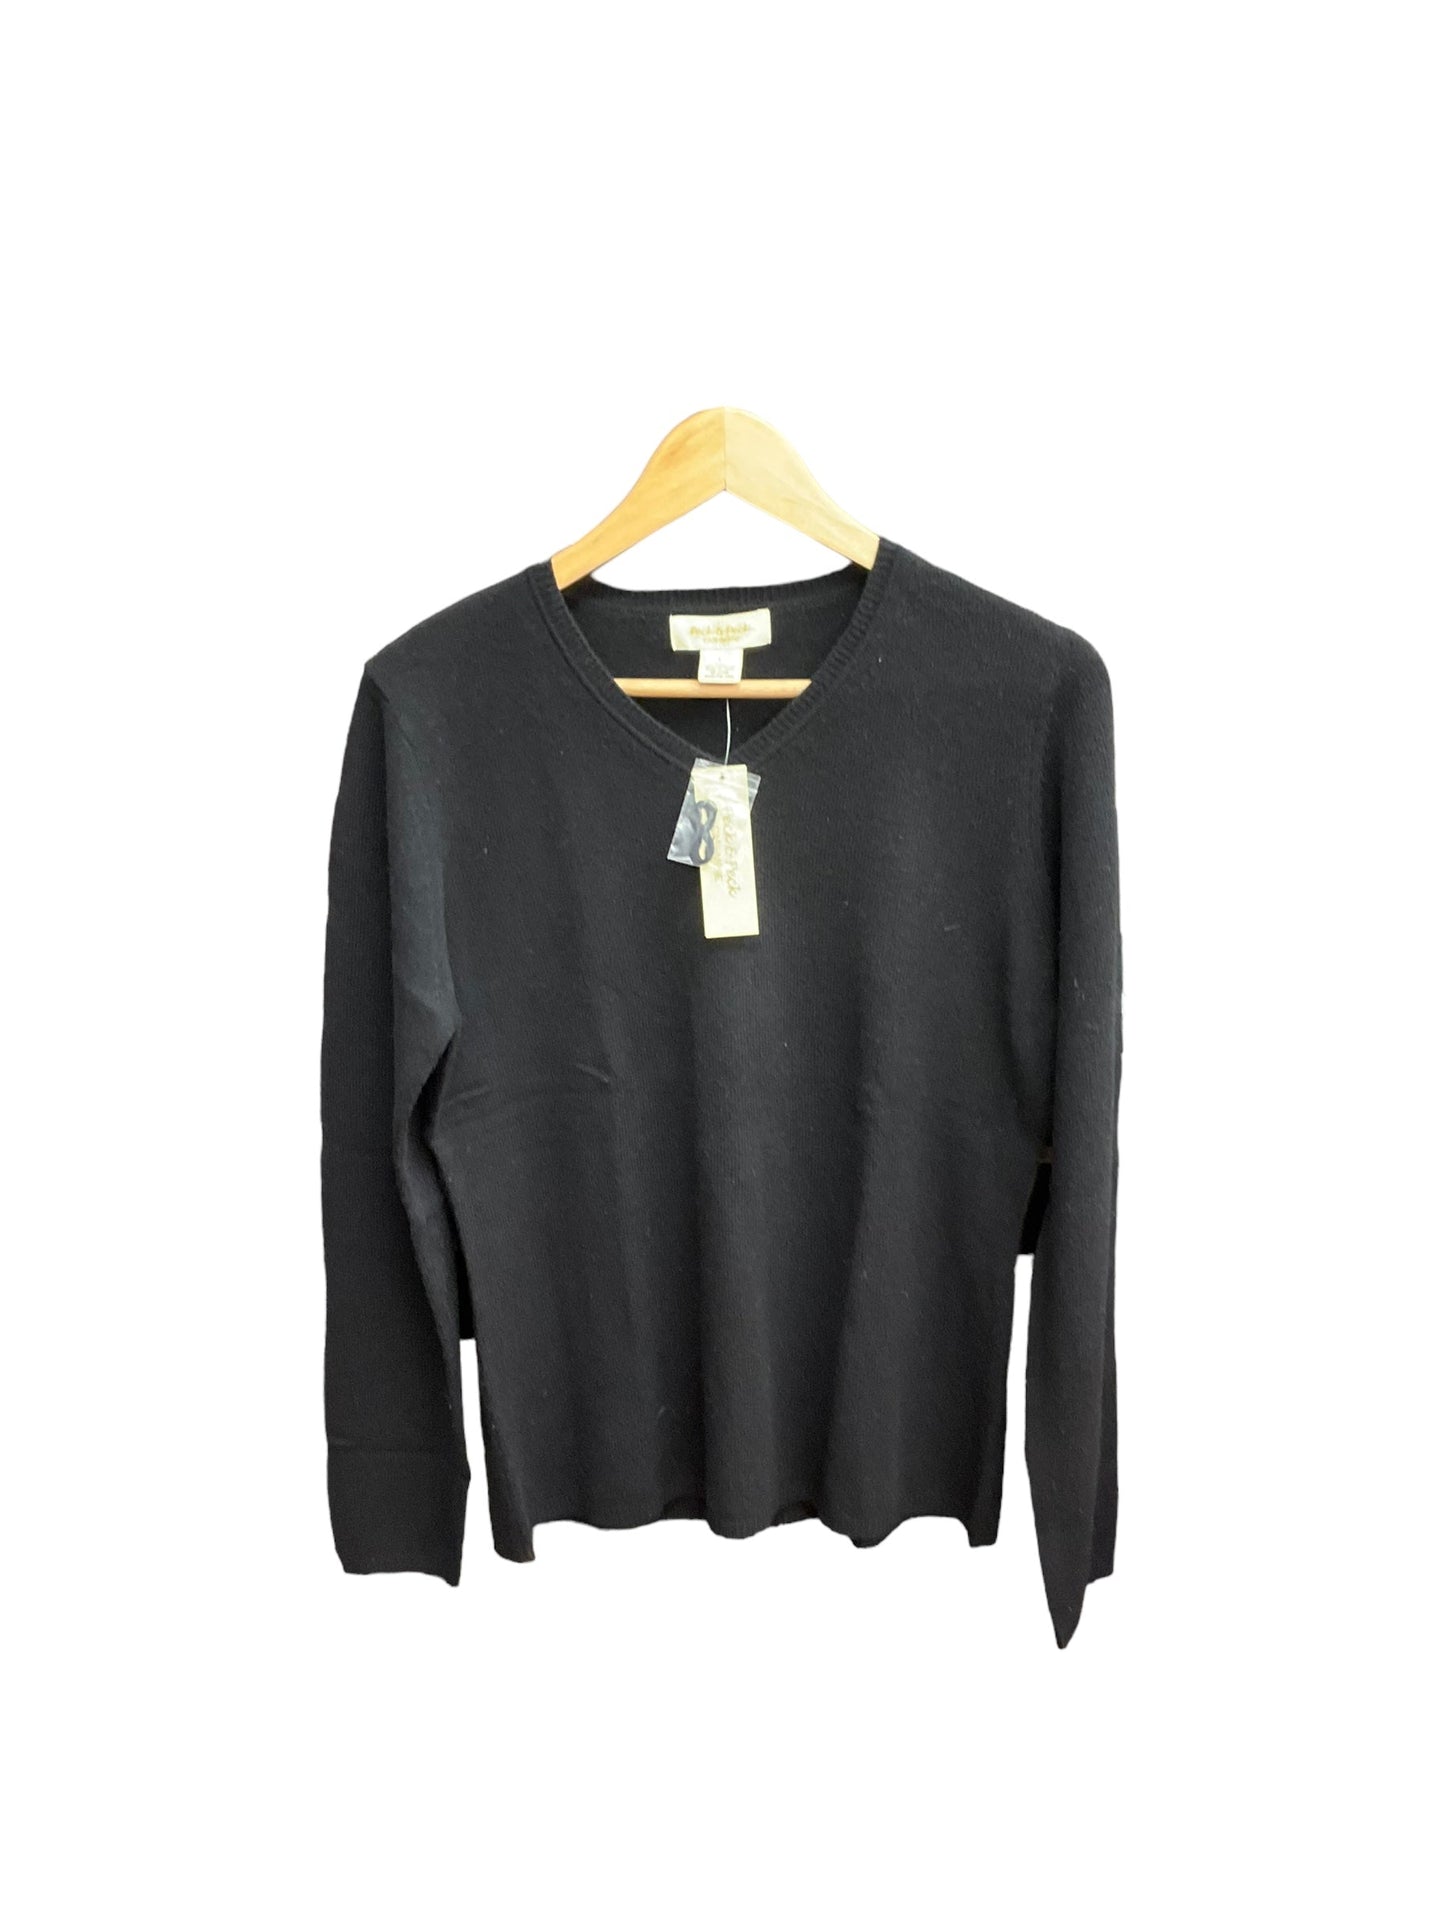 Black Sweater Cashmere Peck And Peck, Size L